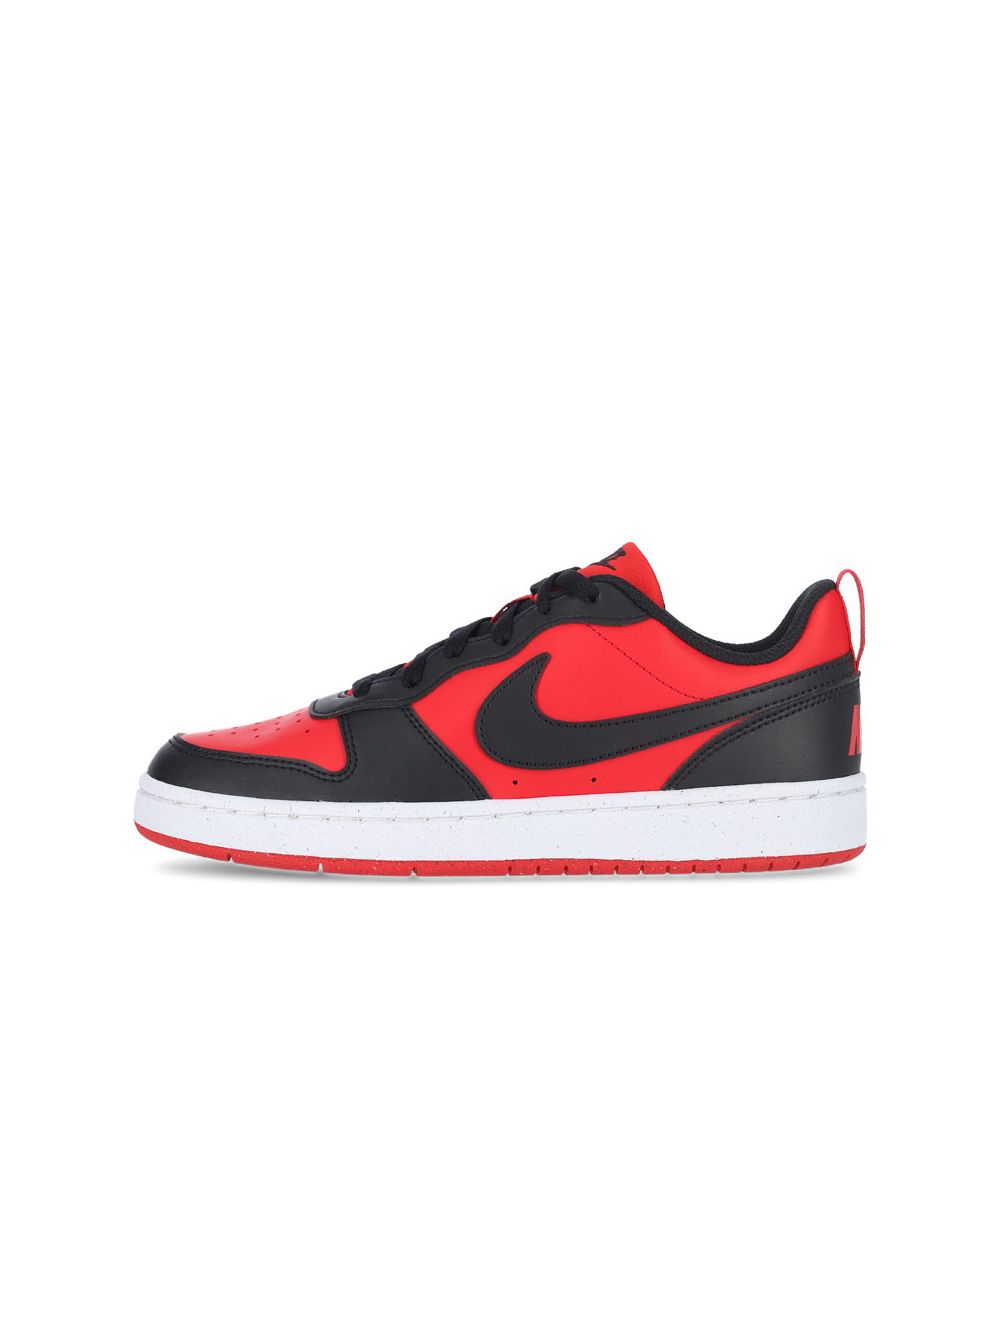 Nike Kids Black Red Silver Leather Low Top Athletic Shoes Boys Size 7Y -  beyond exchange